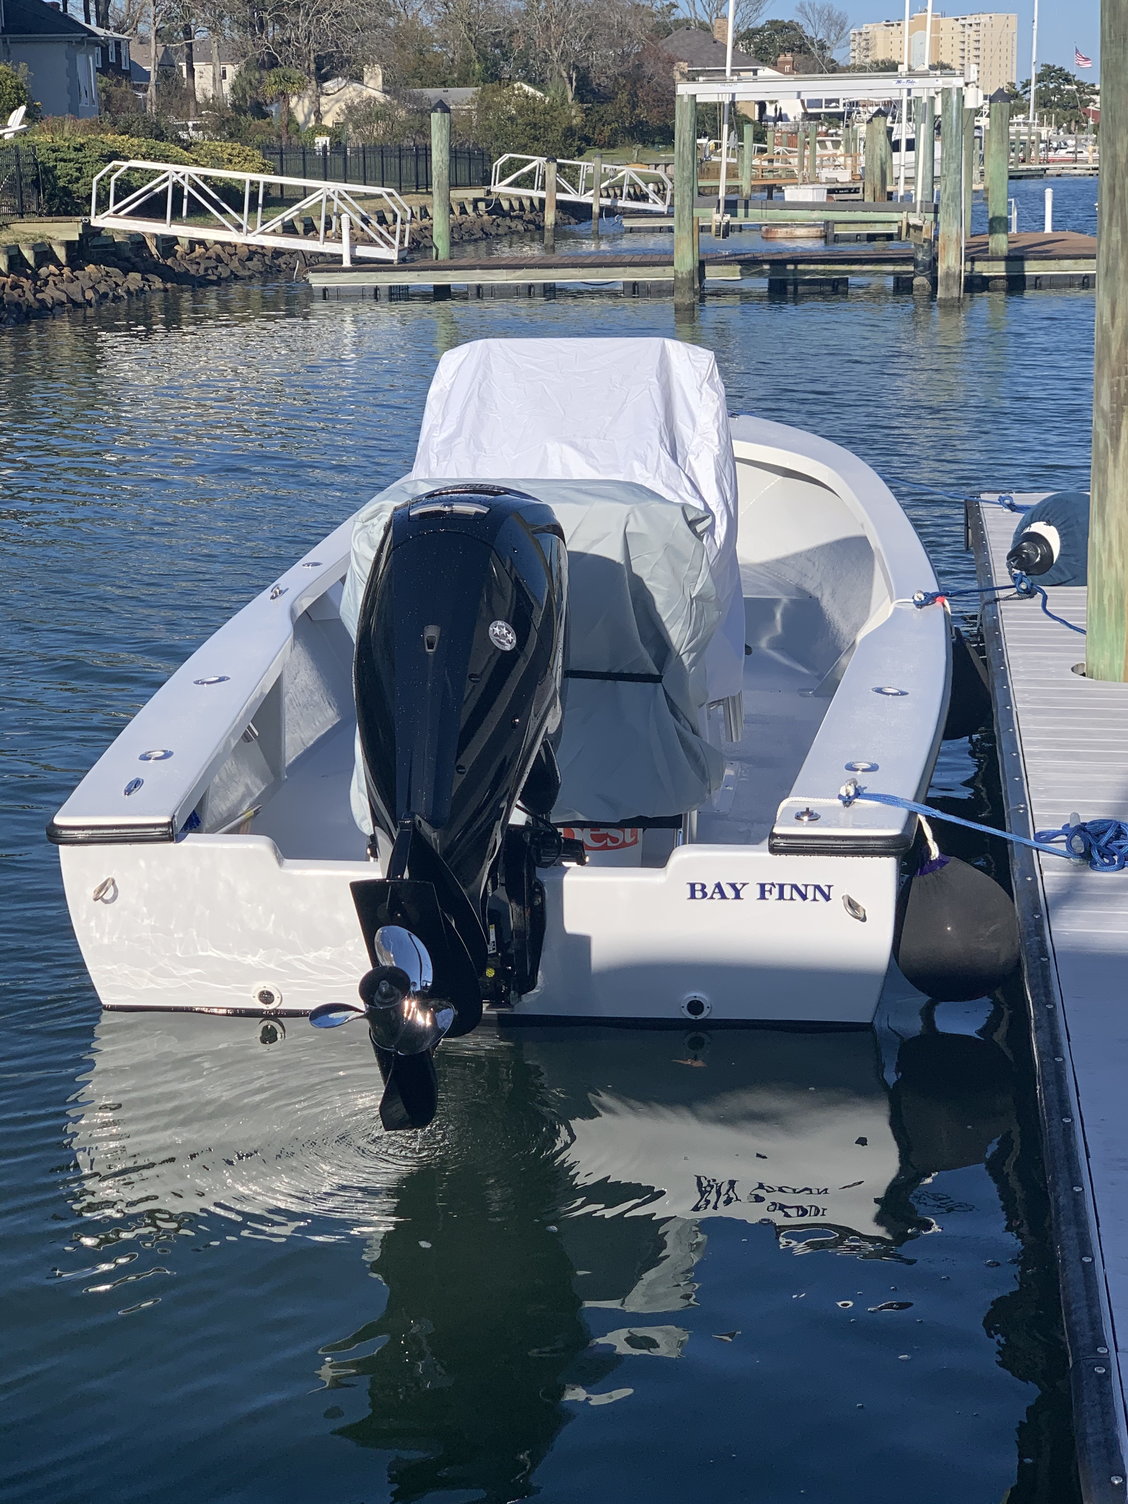 Best mounted dock bumpers? - The Hull Truth - Boating and Fishing